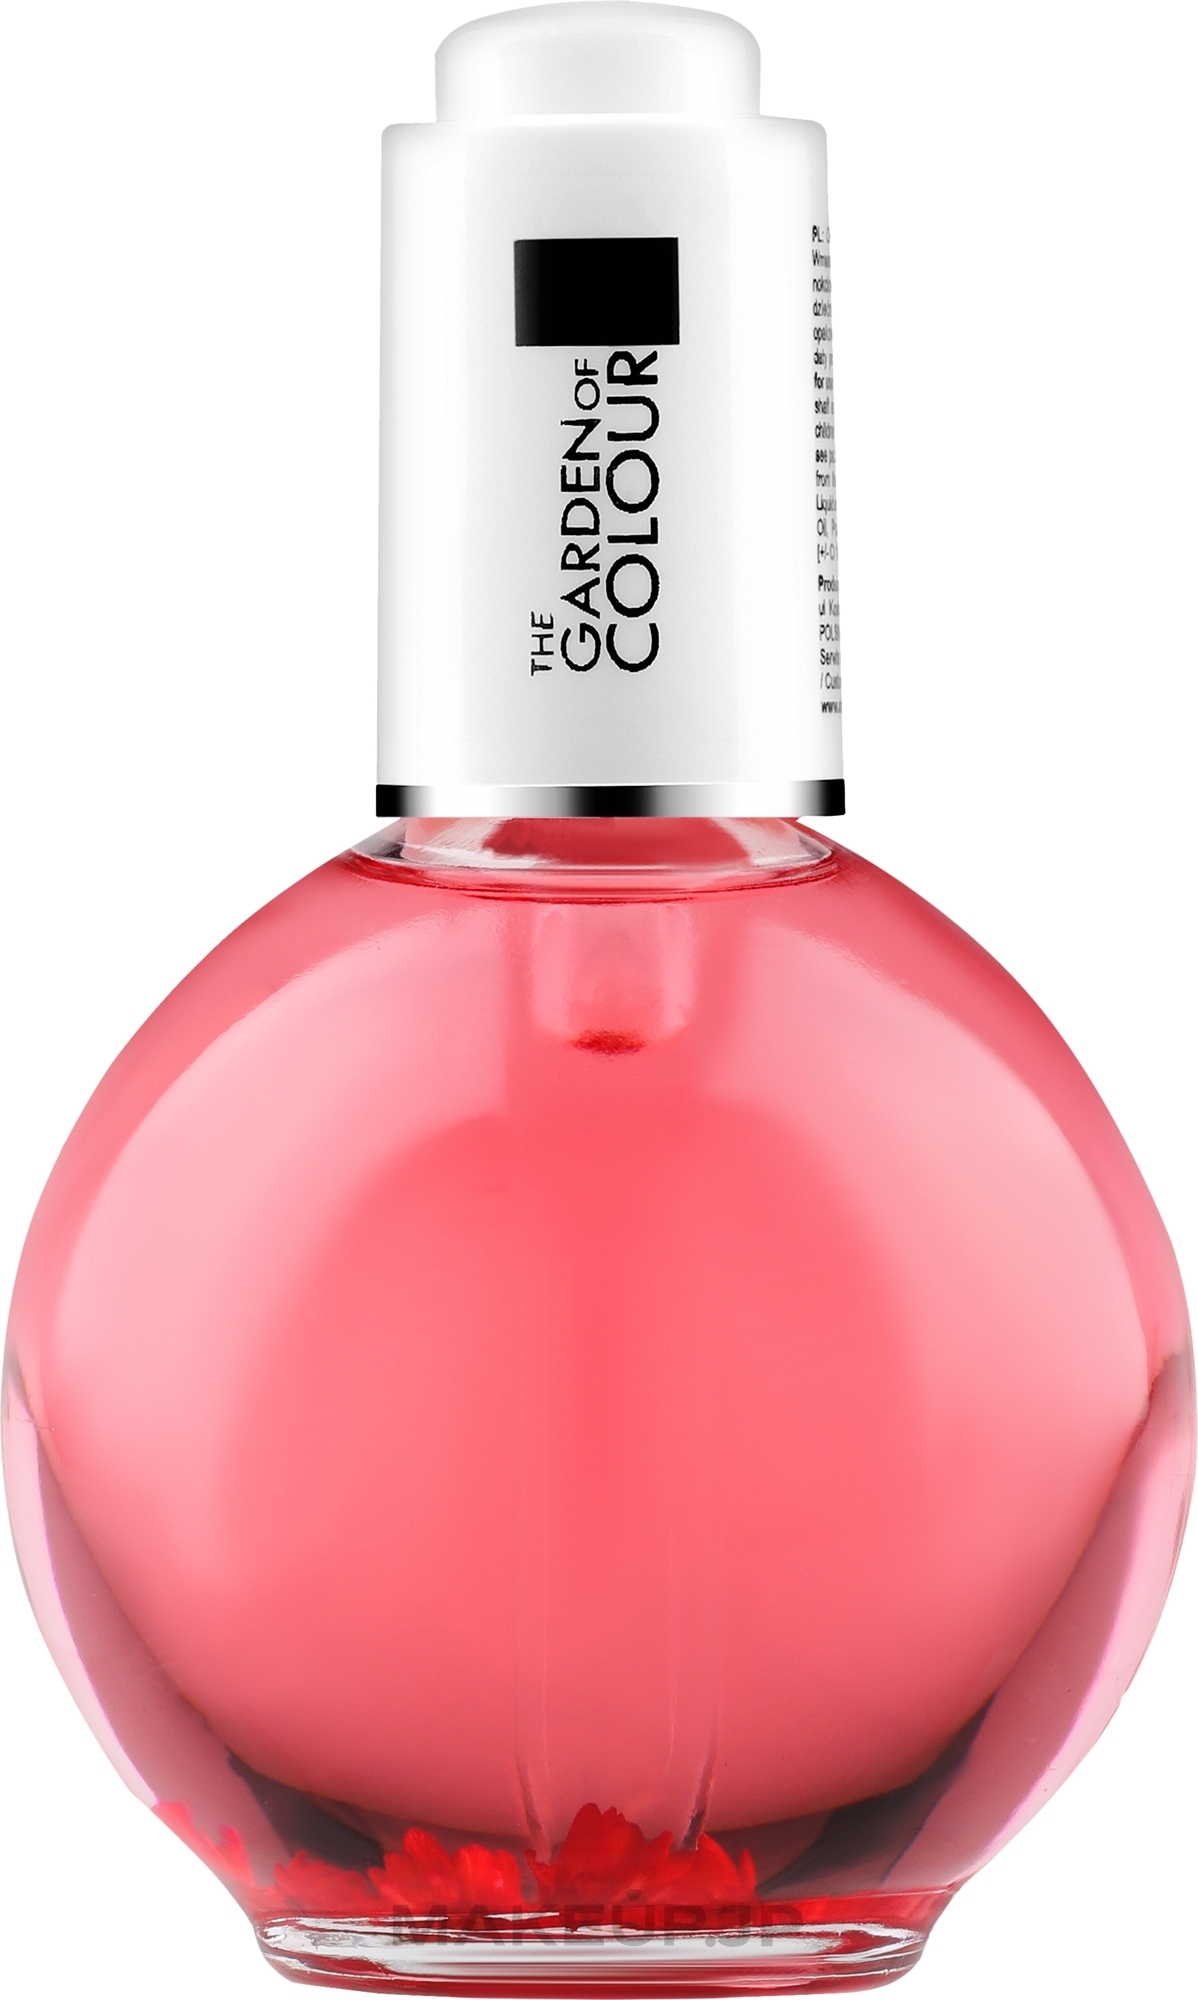 Nail and Cuticle Oil with Flowers "Raspberry" - Silcare Cuticle Oil Raspberry Light Pink — photo 75 ml